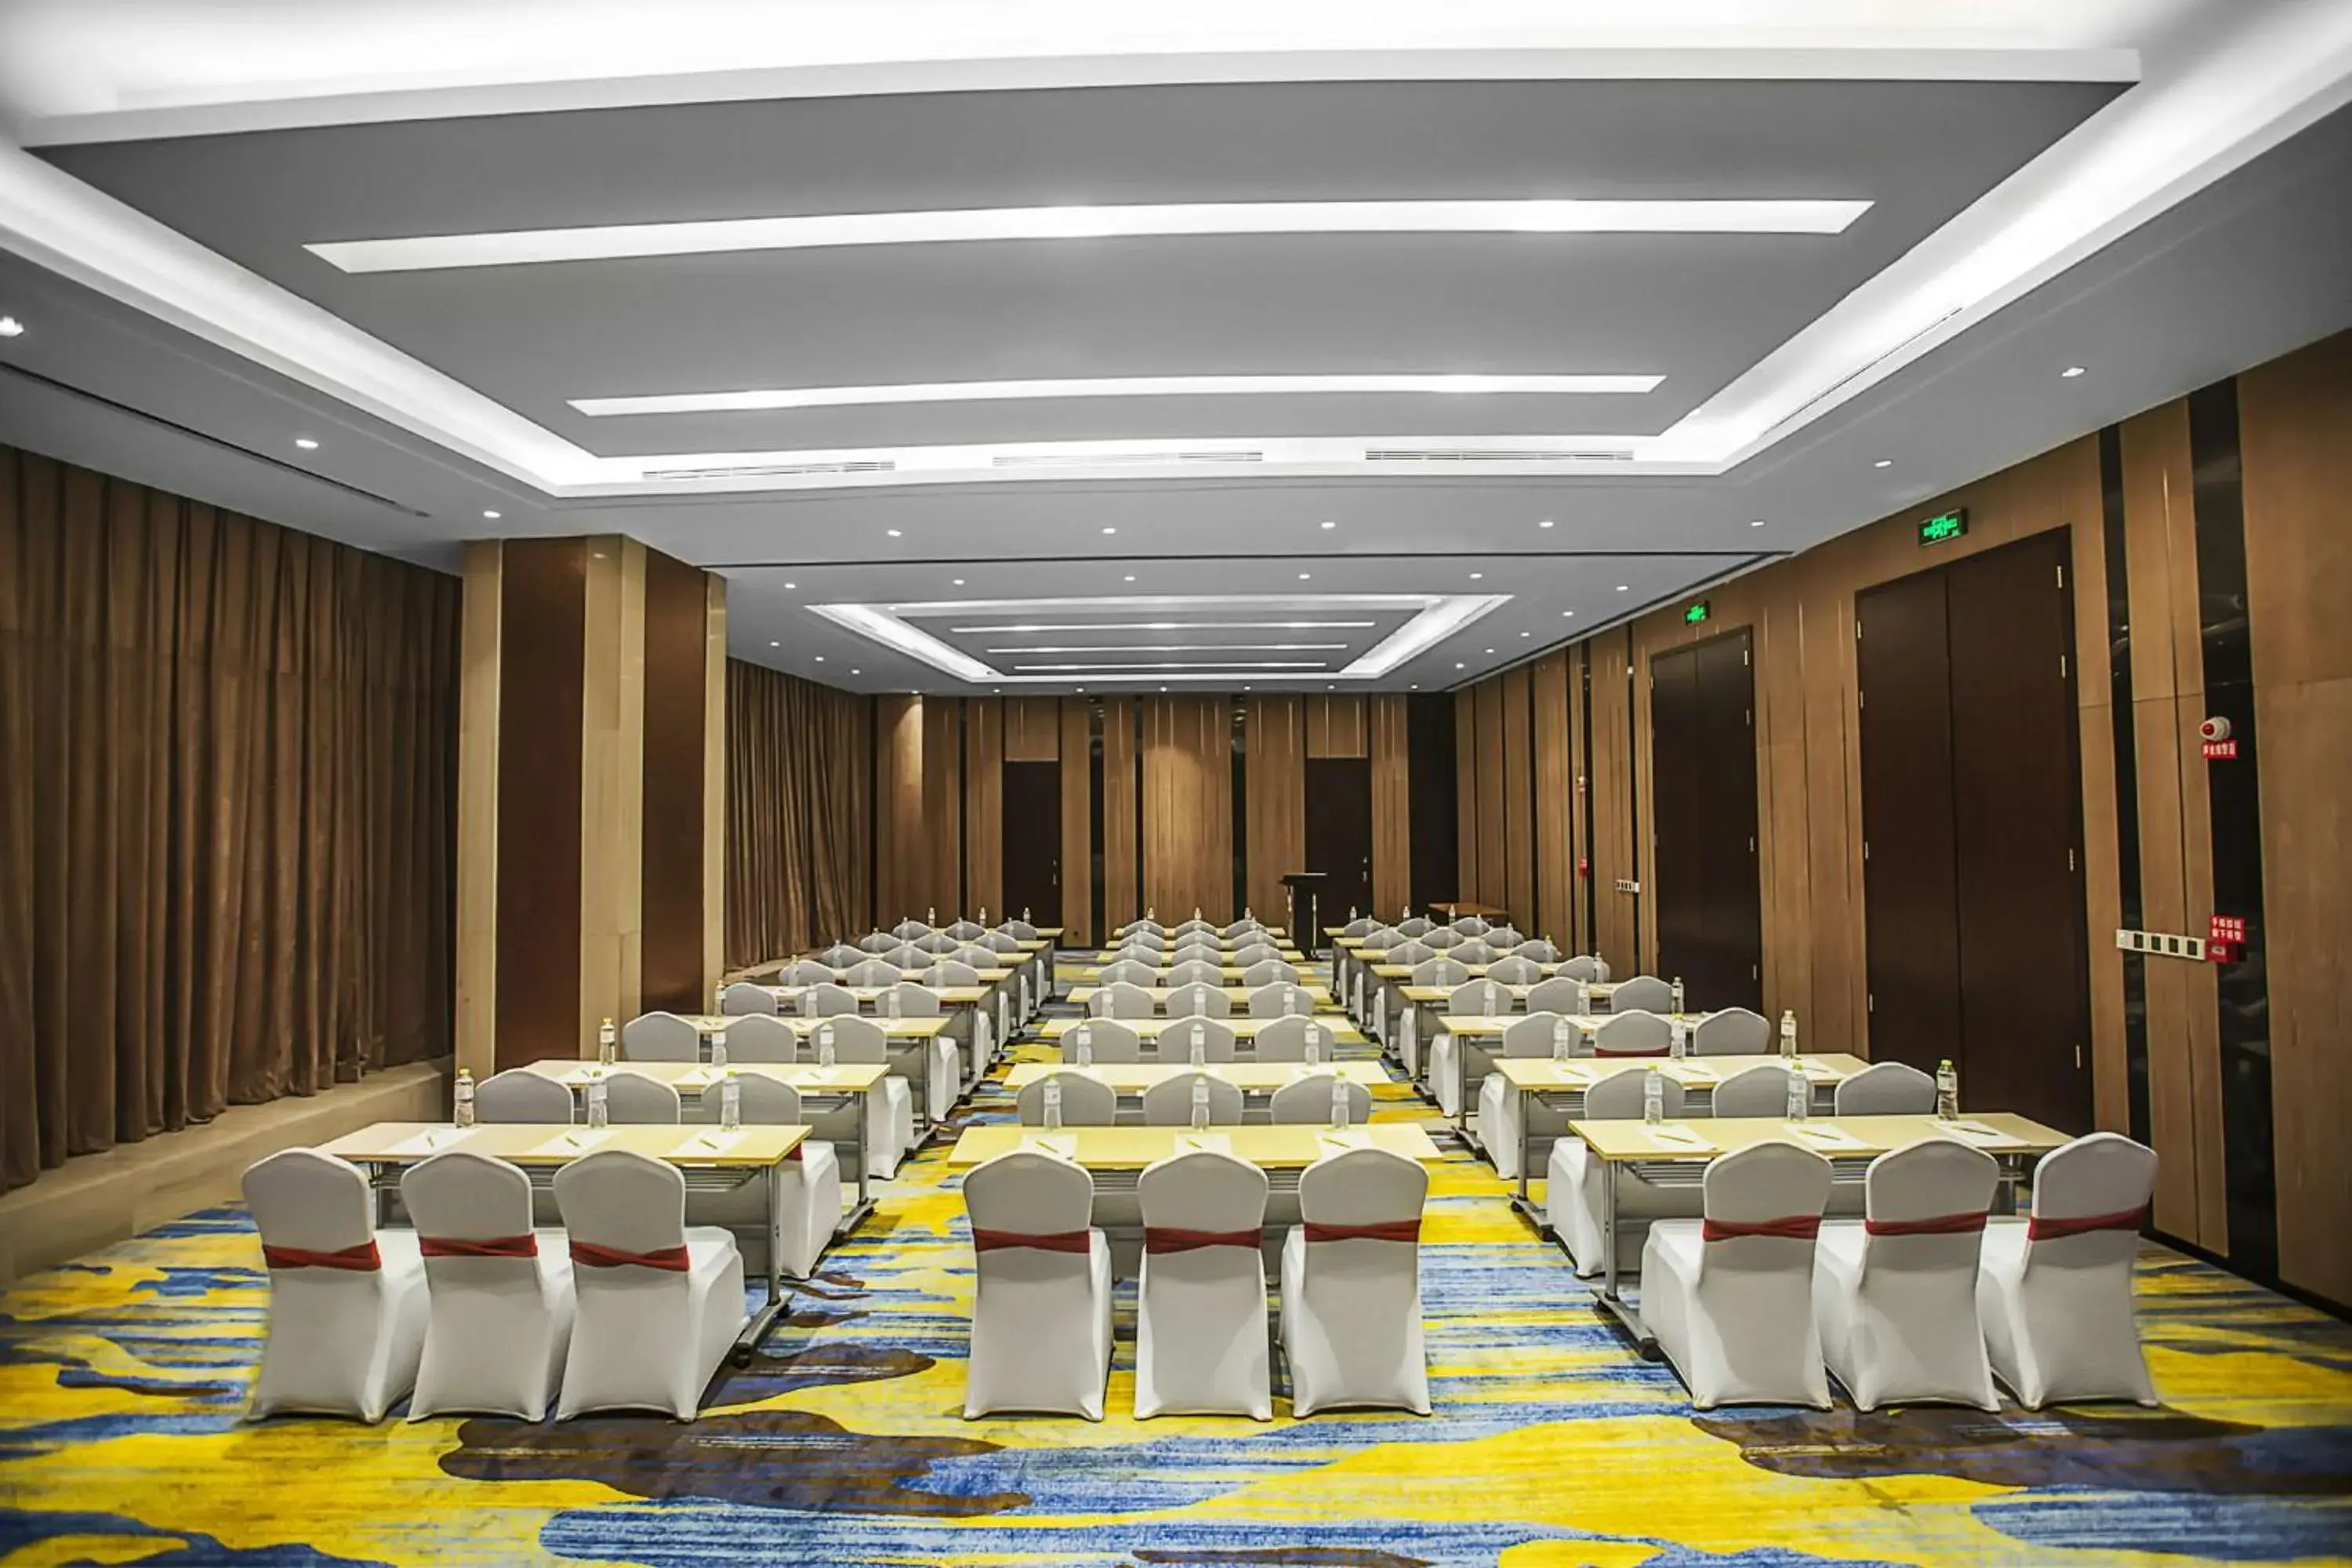 Meeting/conference room in Hilton Garden Inn Guiyang, China